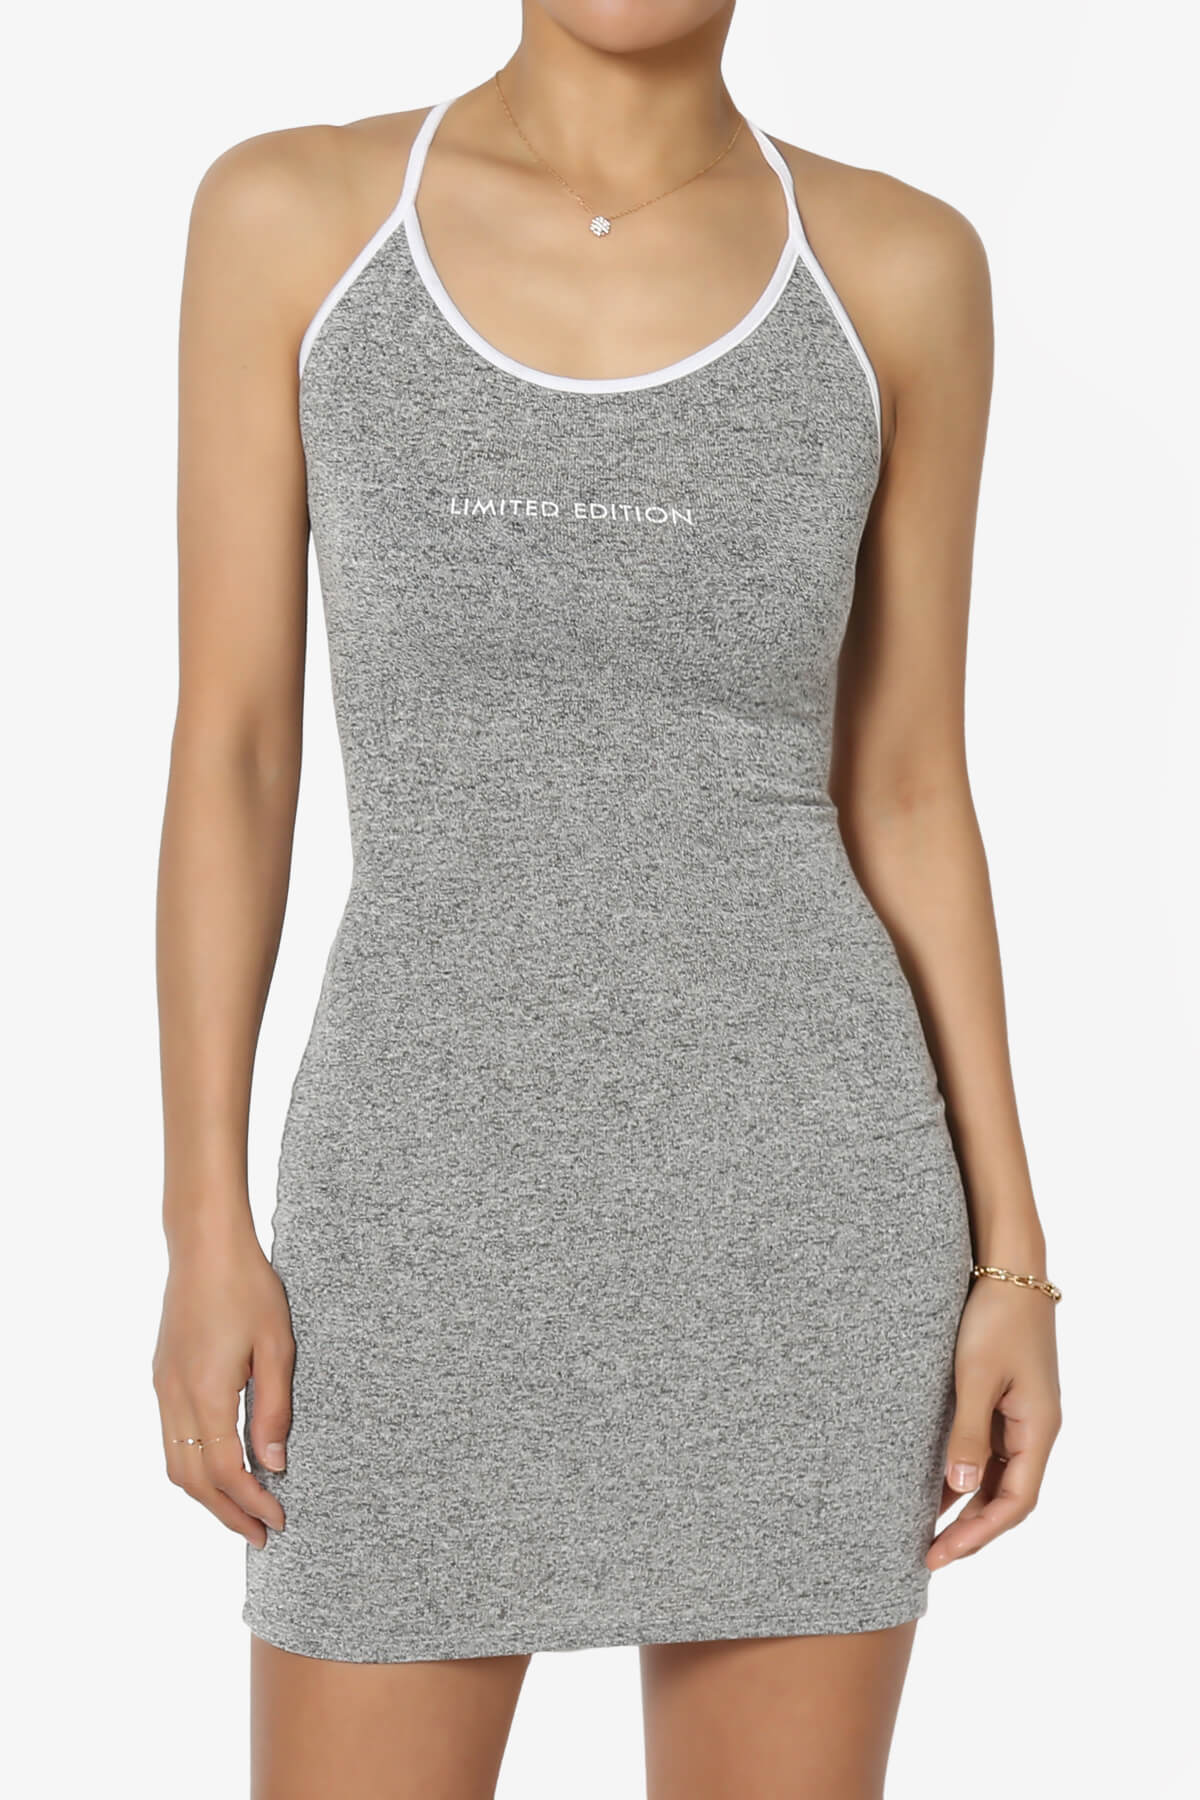 LIMITED EDITION Strappy Open Back Mini Dress HEATHER GREY_2